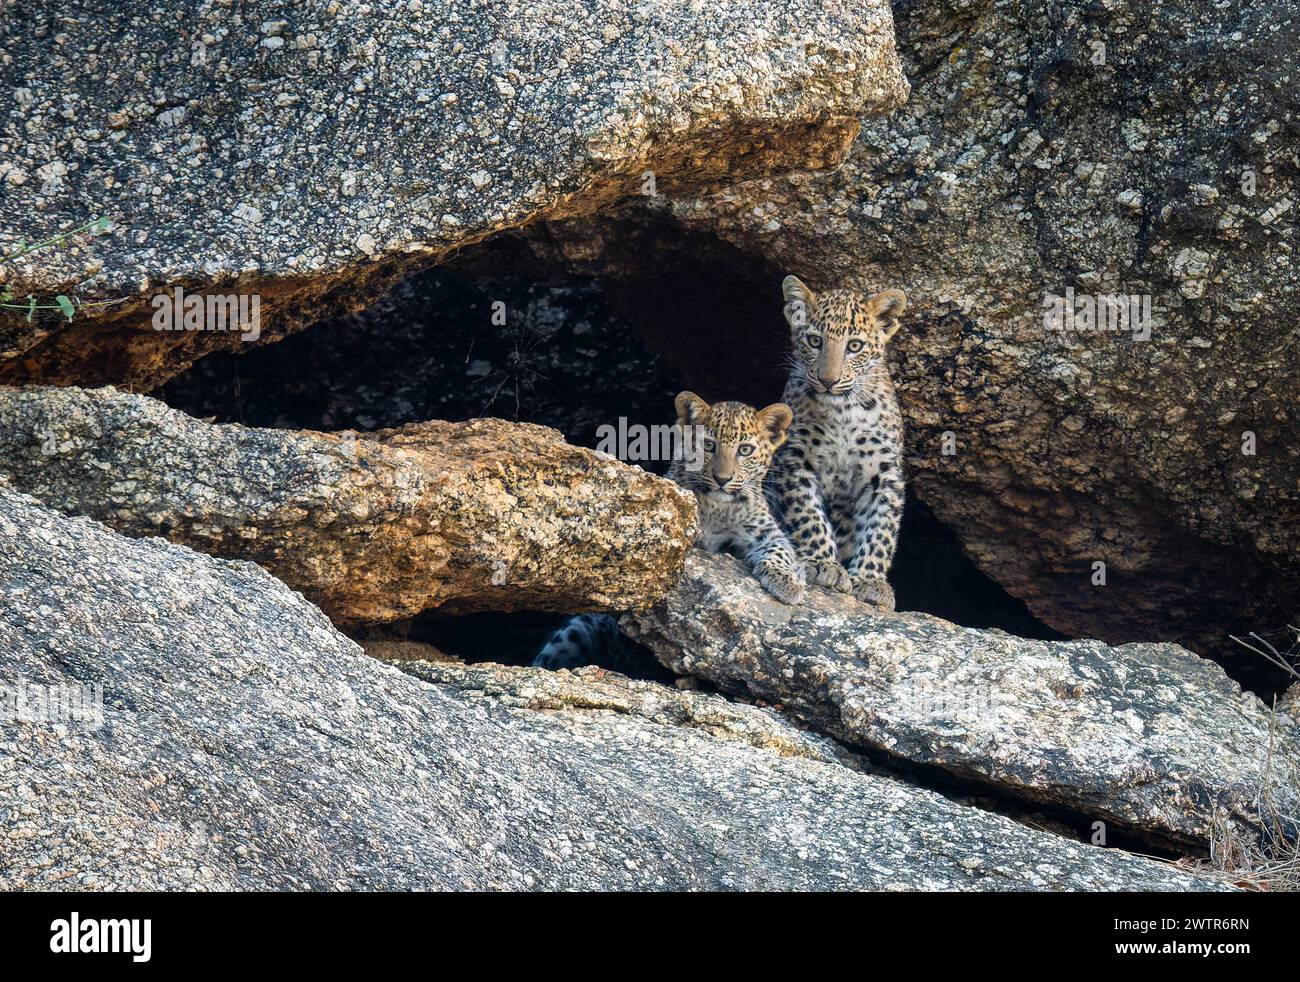 Two cute leopard cubs peeking out of their cave.    INDIA CAN YOU spot the elusive leopards spotted by a British photographer hiding in plain sight in Stock Photo